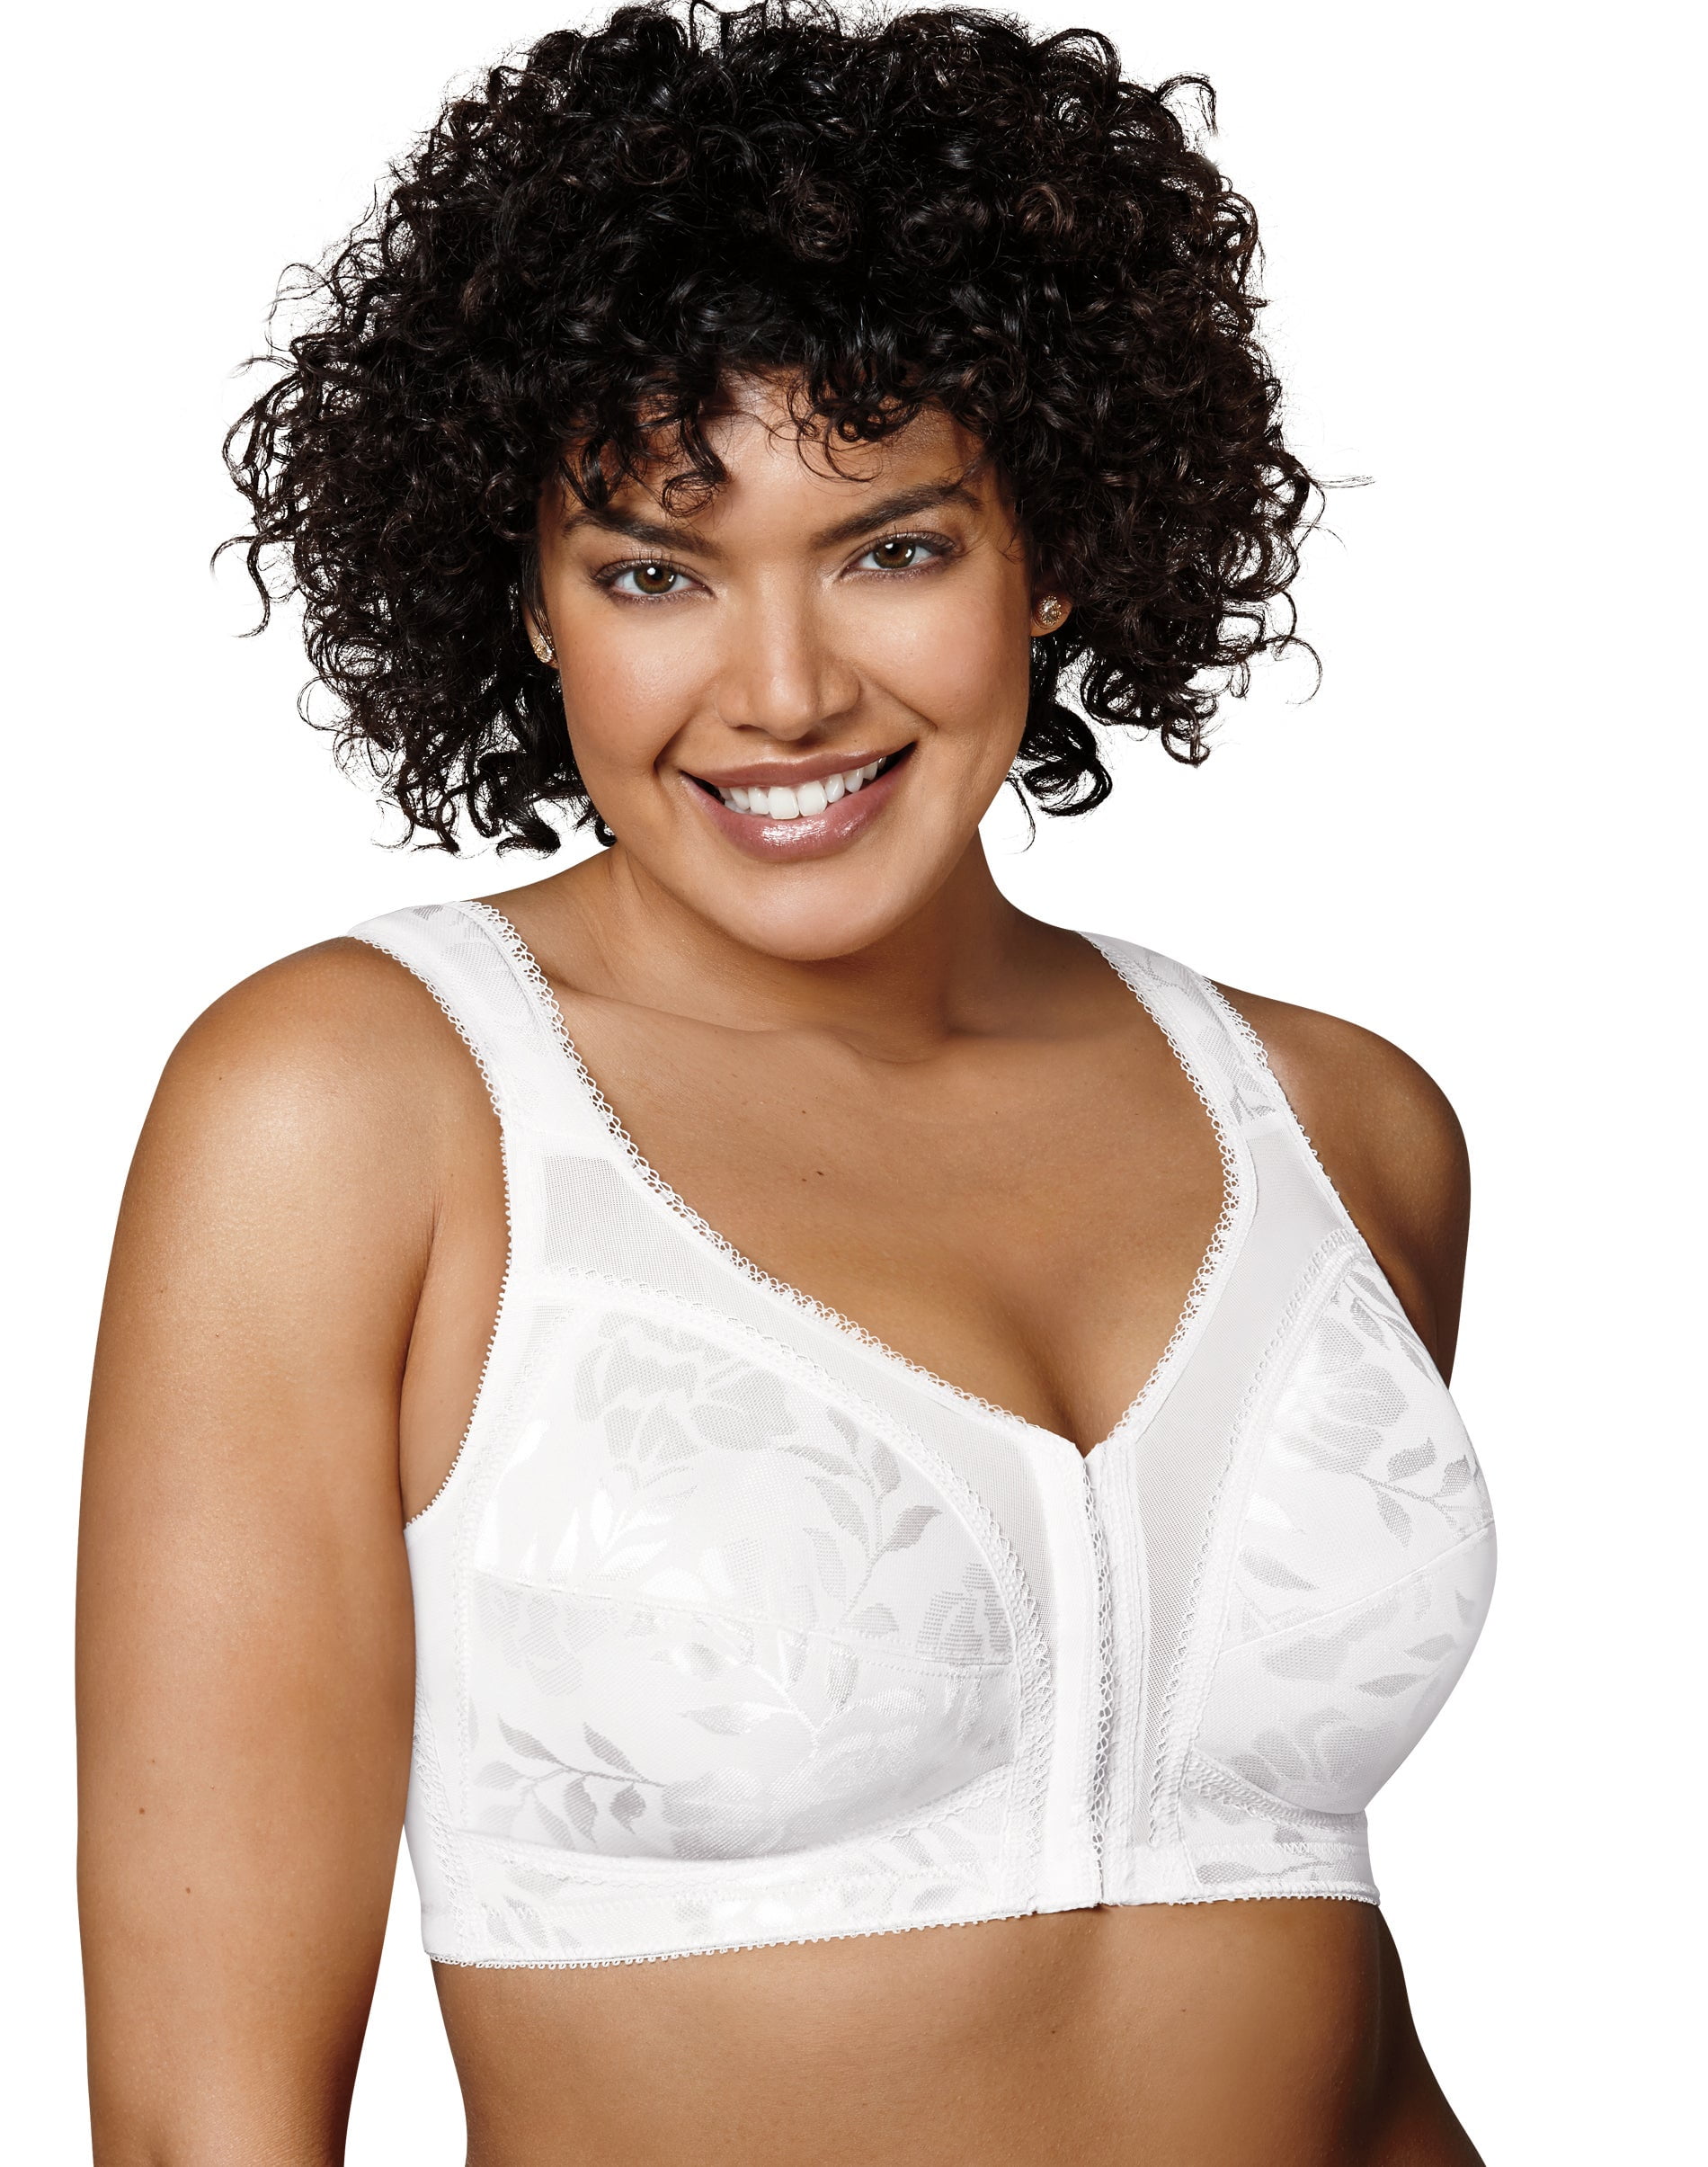 PLAYTEX Women's Plus Size 18 Hour Front-Close Wireless Bra with Flex Back  4695-46 DD, White at  Women's Clothing store: Bras